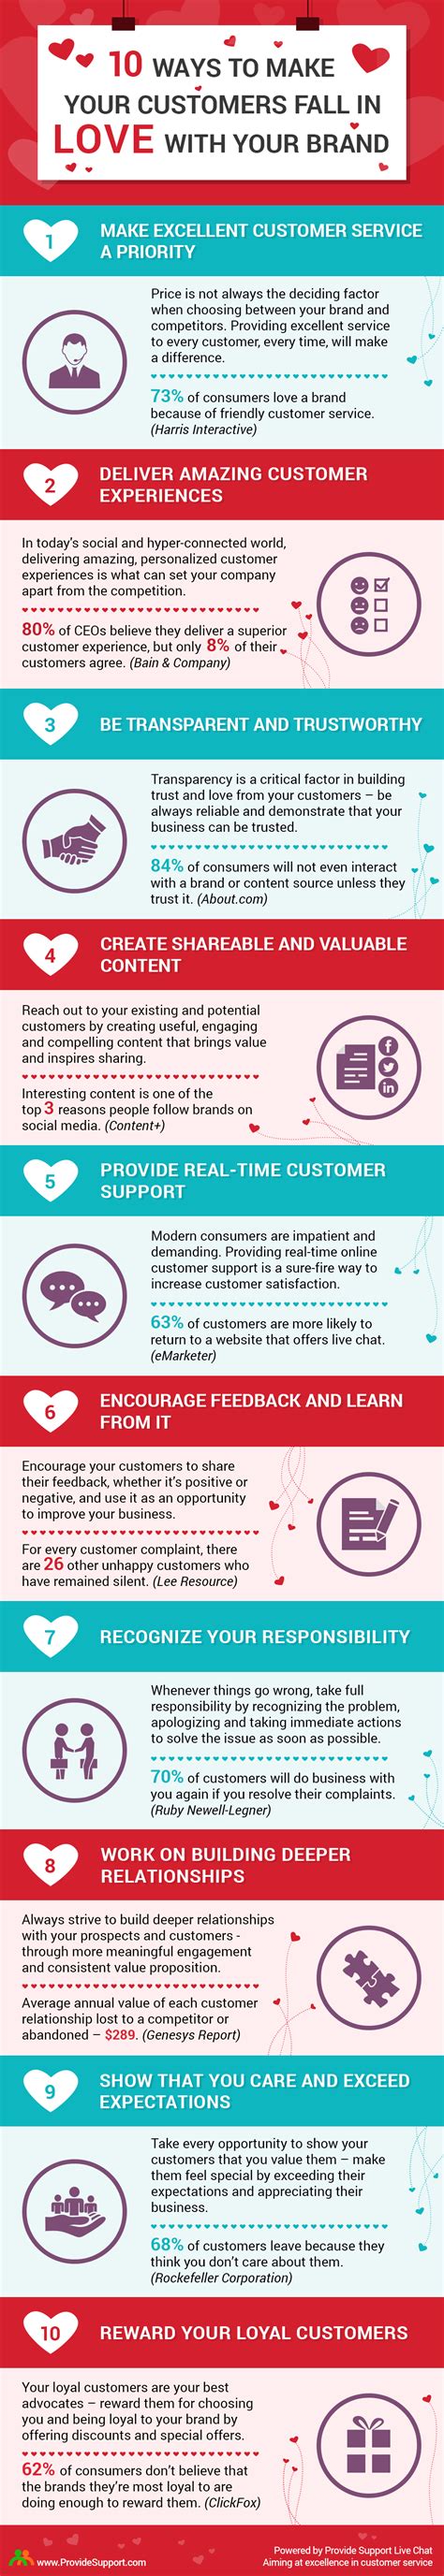 10 Ways To Make Your Customers Fall In Love With Your Brand